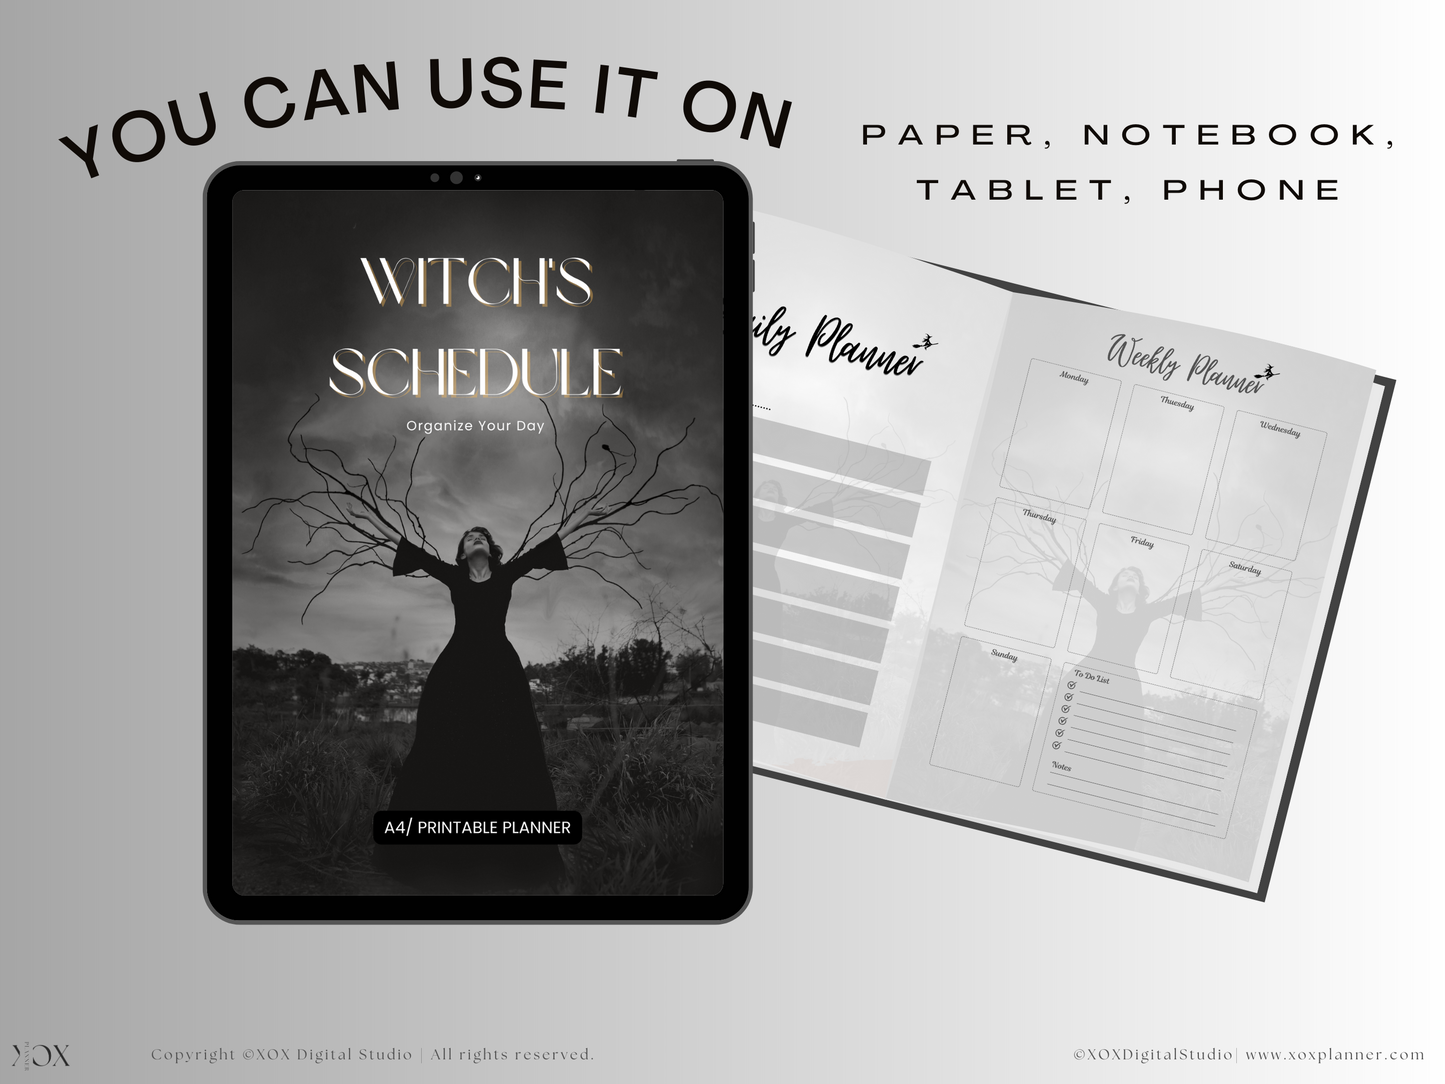 Schedule witch Planner (daily, weekly, monthly) / undated - Printable Instant download PDF